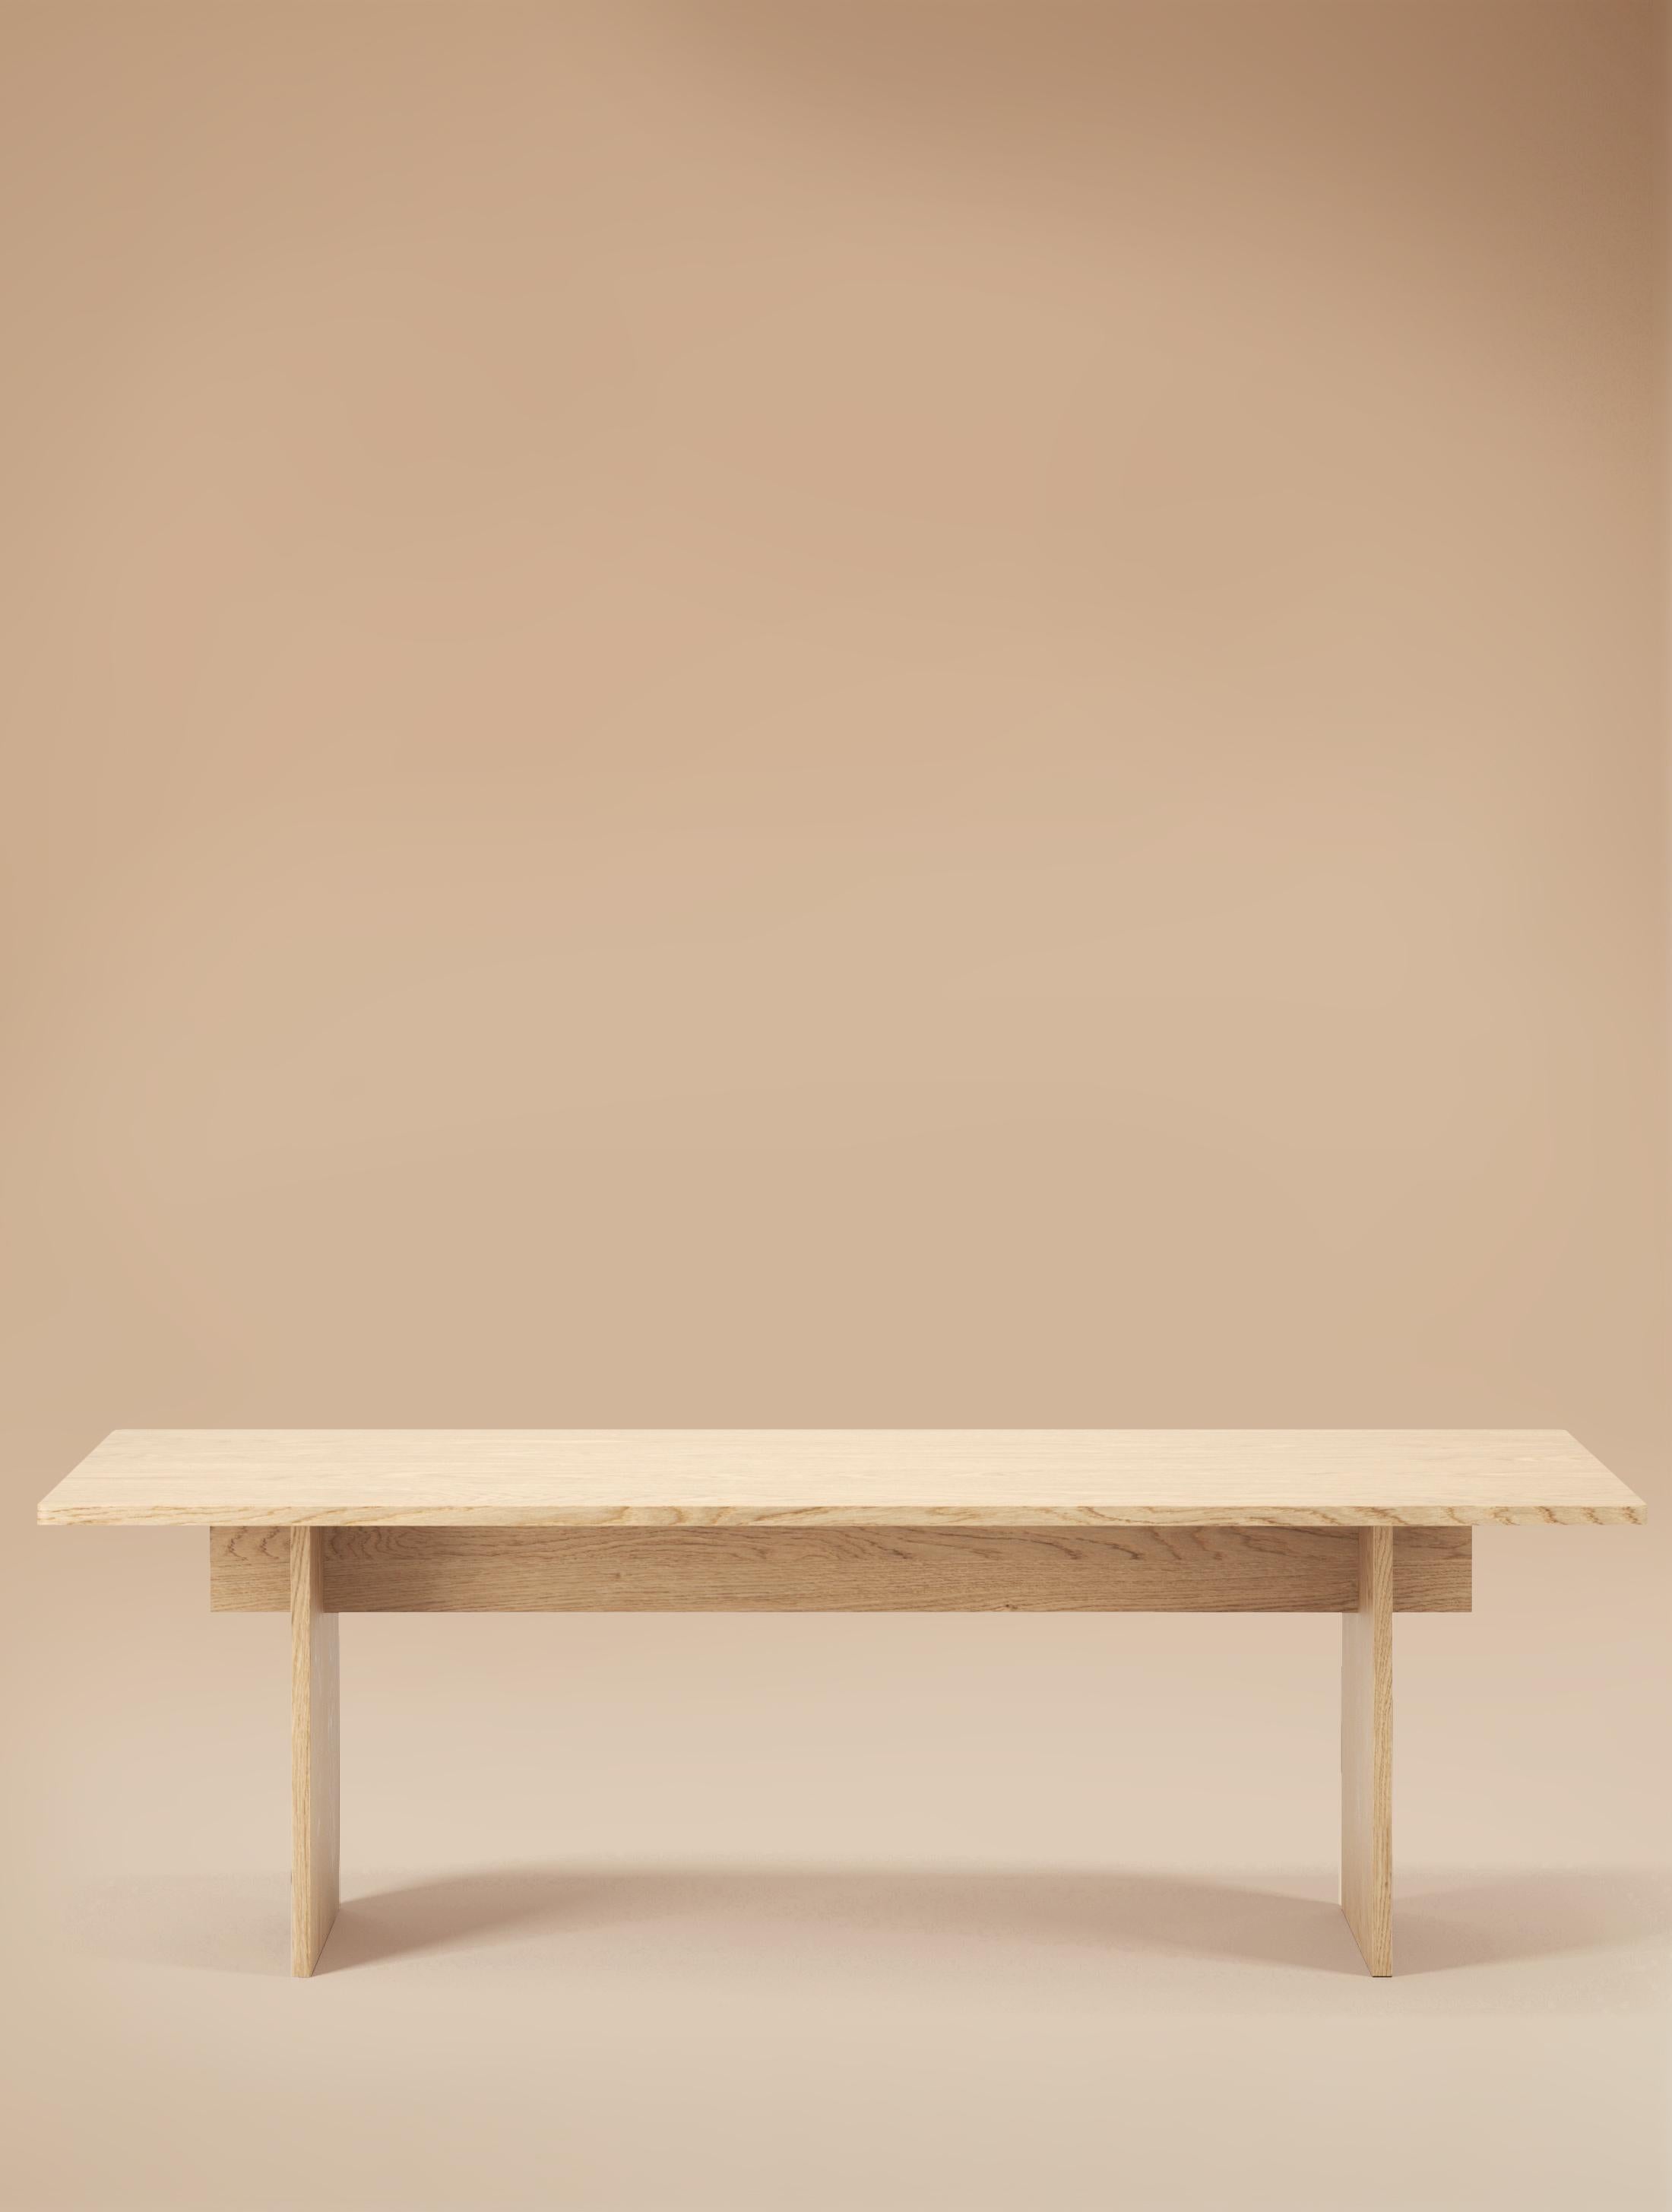 6 Seater Faure Table Handcrafted in Blackened Oiled Oak by Lemon 3